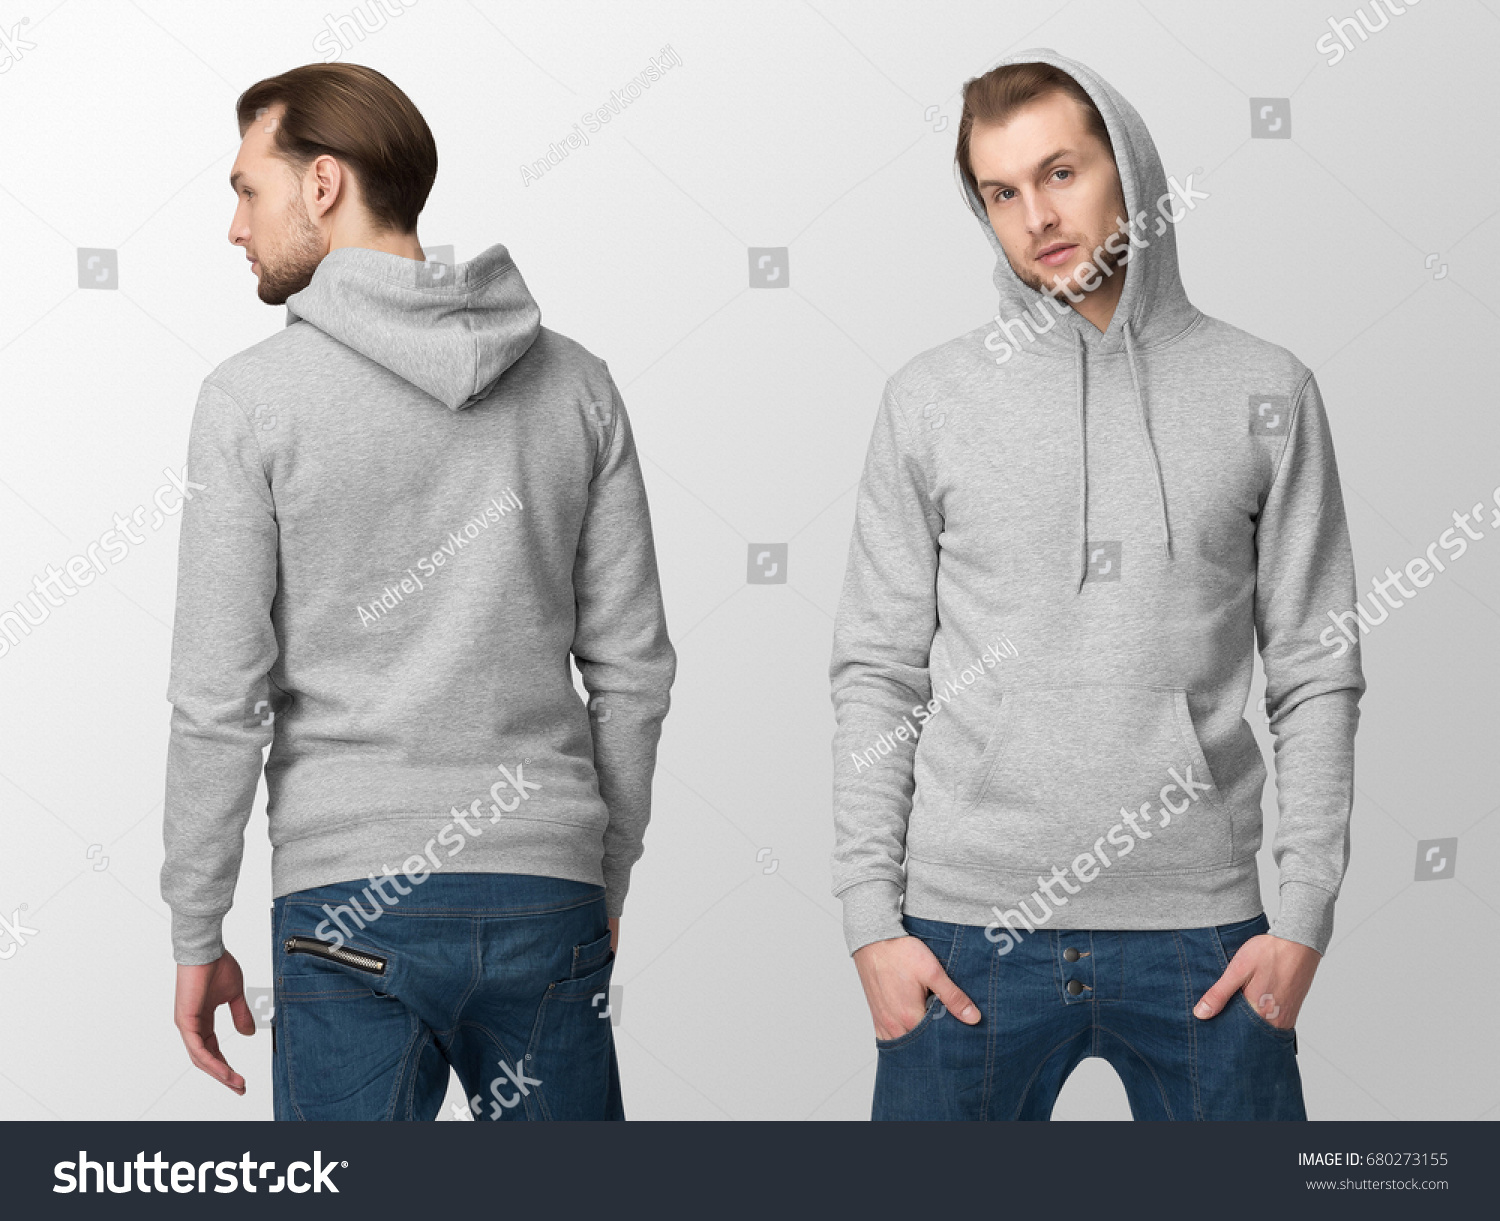 Heather grey hoodie on a young man in jeans, isolated, front and back, mockup. #680273155